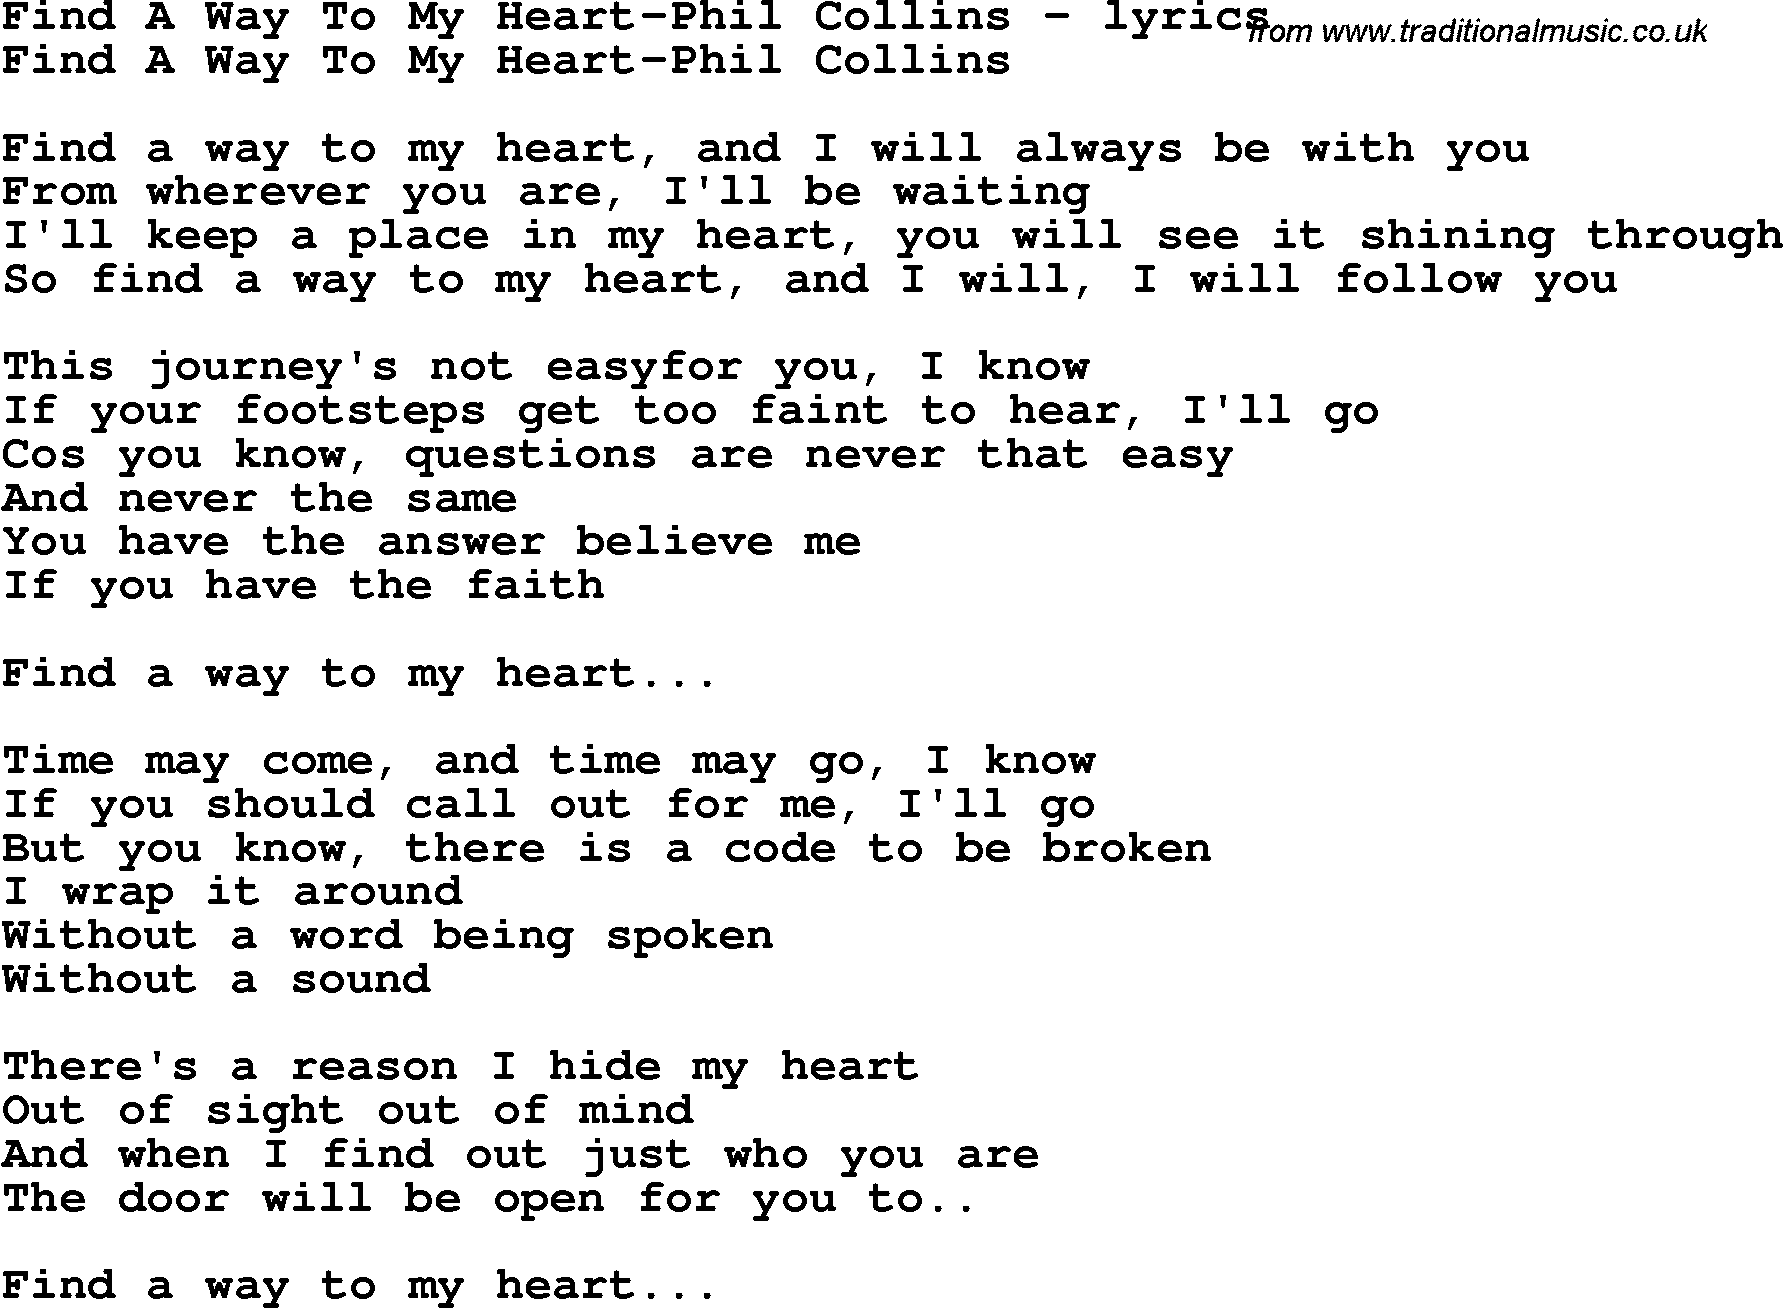 Love Song Lyrics for: Find A Way To My Heart-Phil Collins